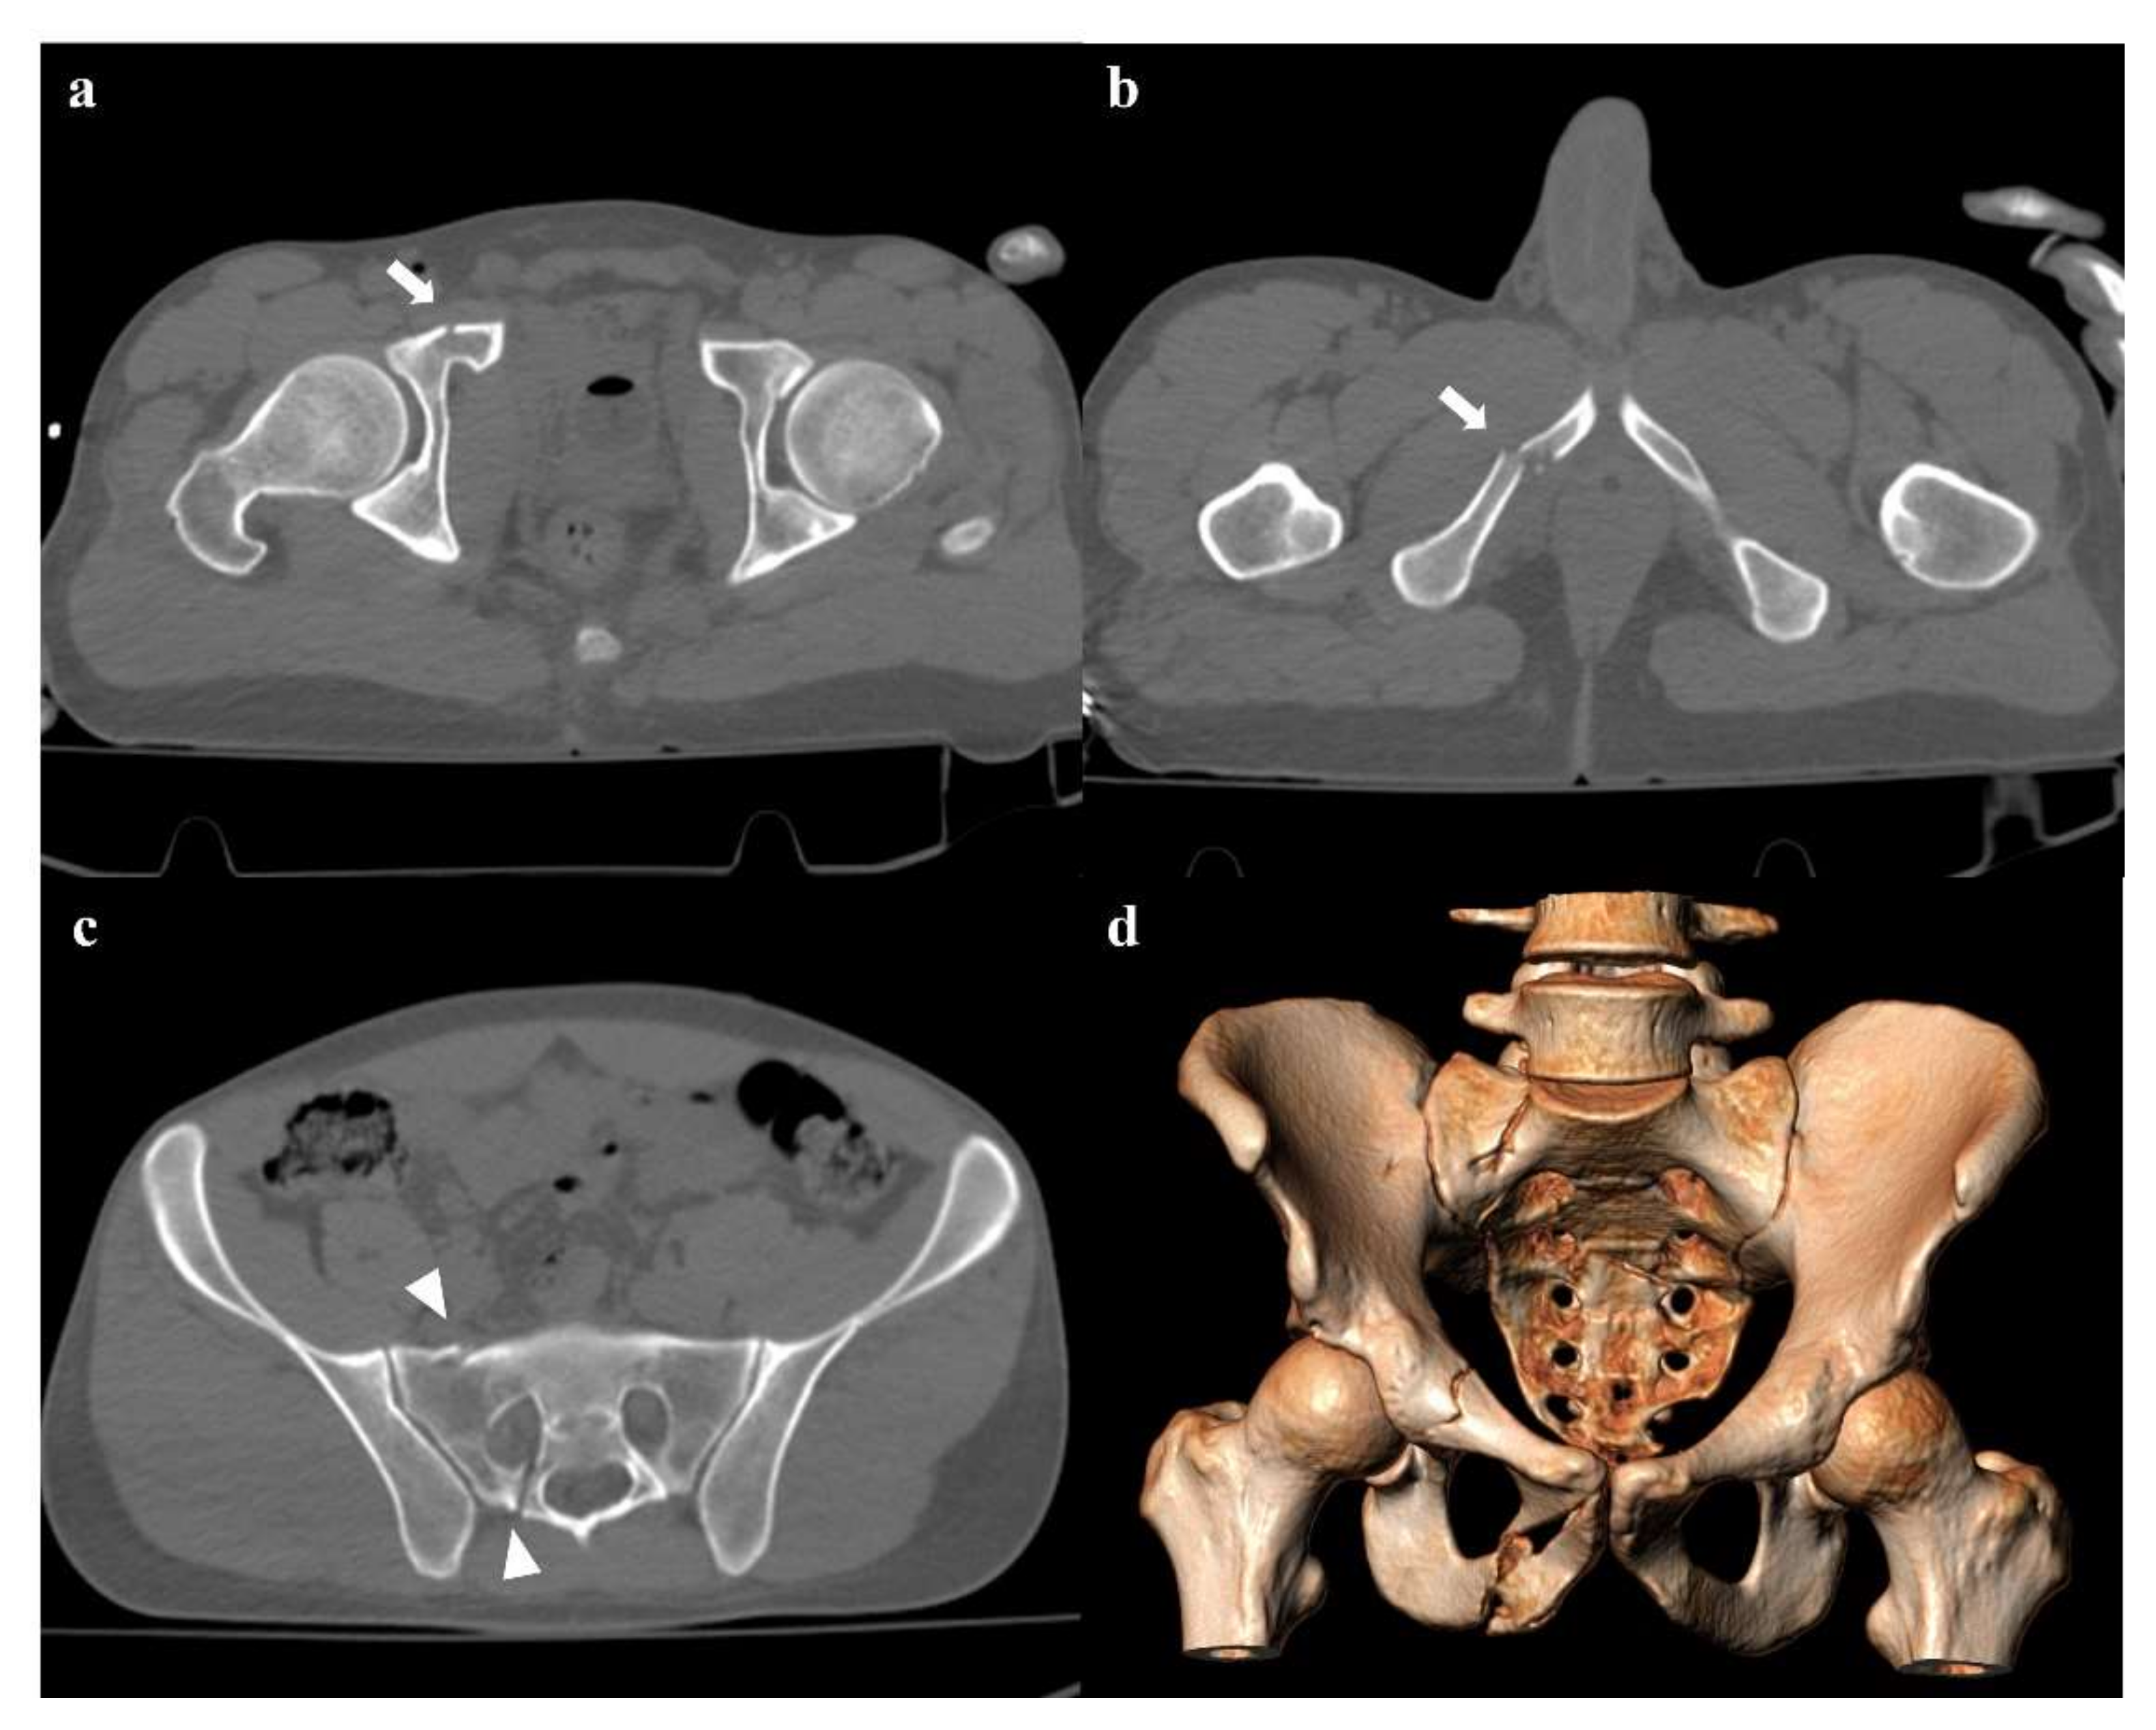 Pelvis, Radiology Reference Article